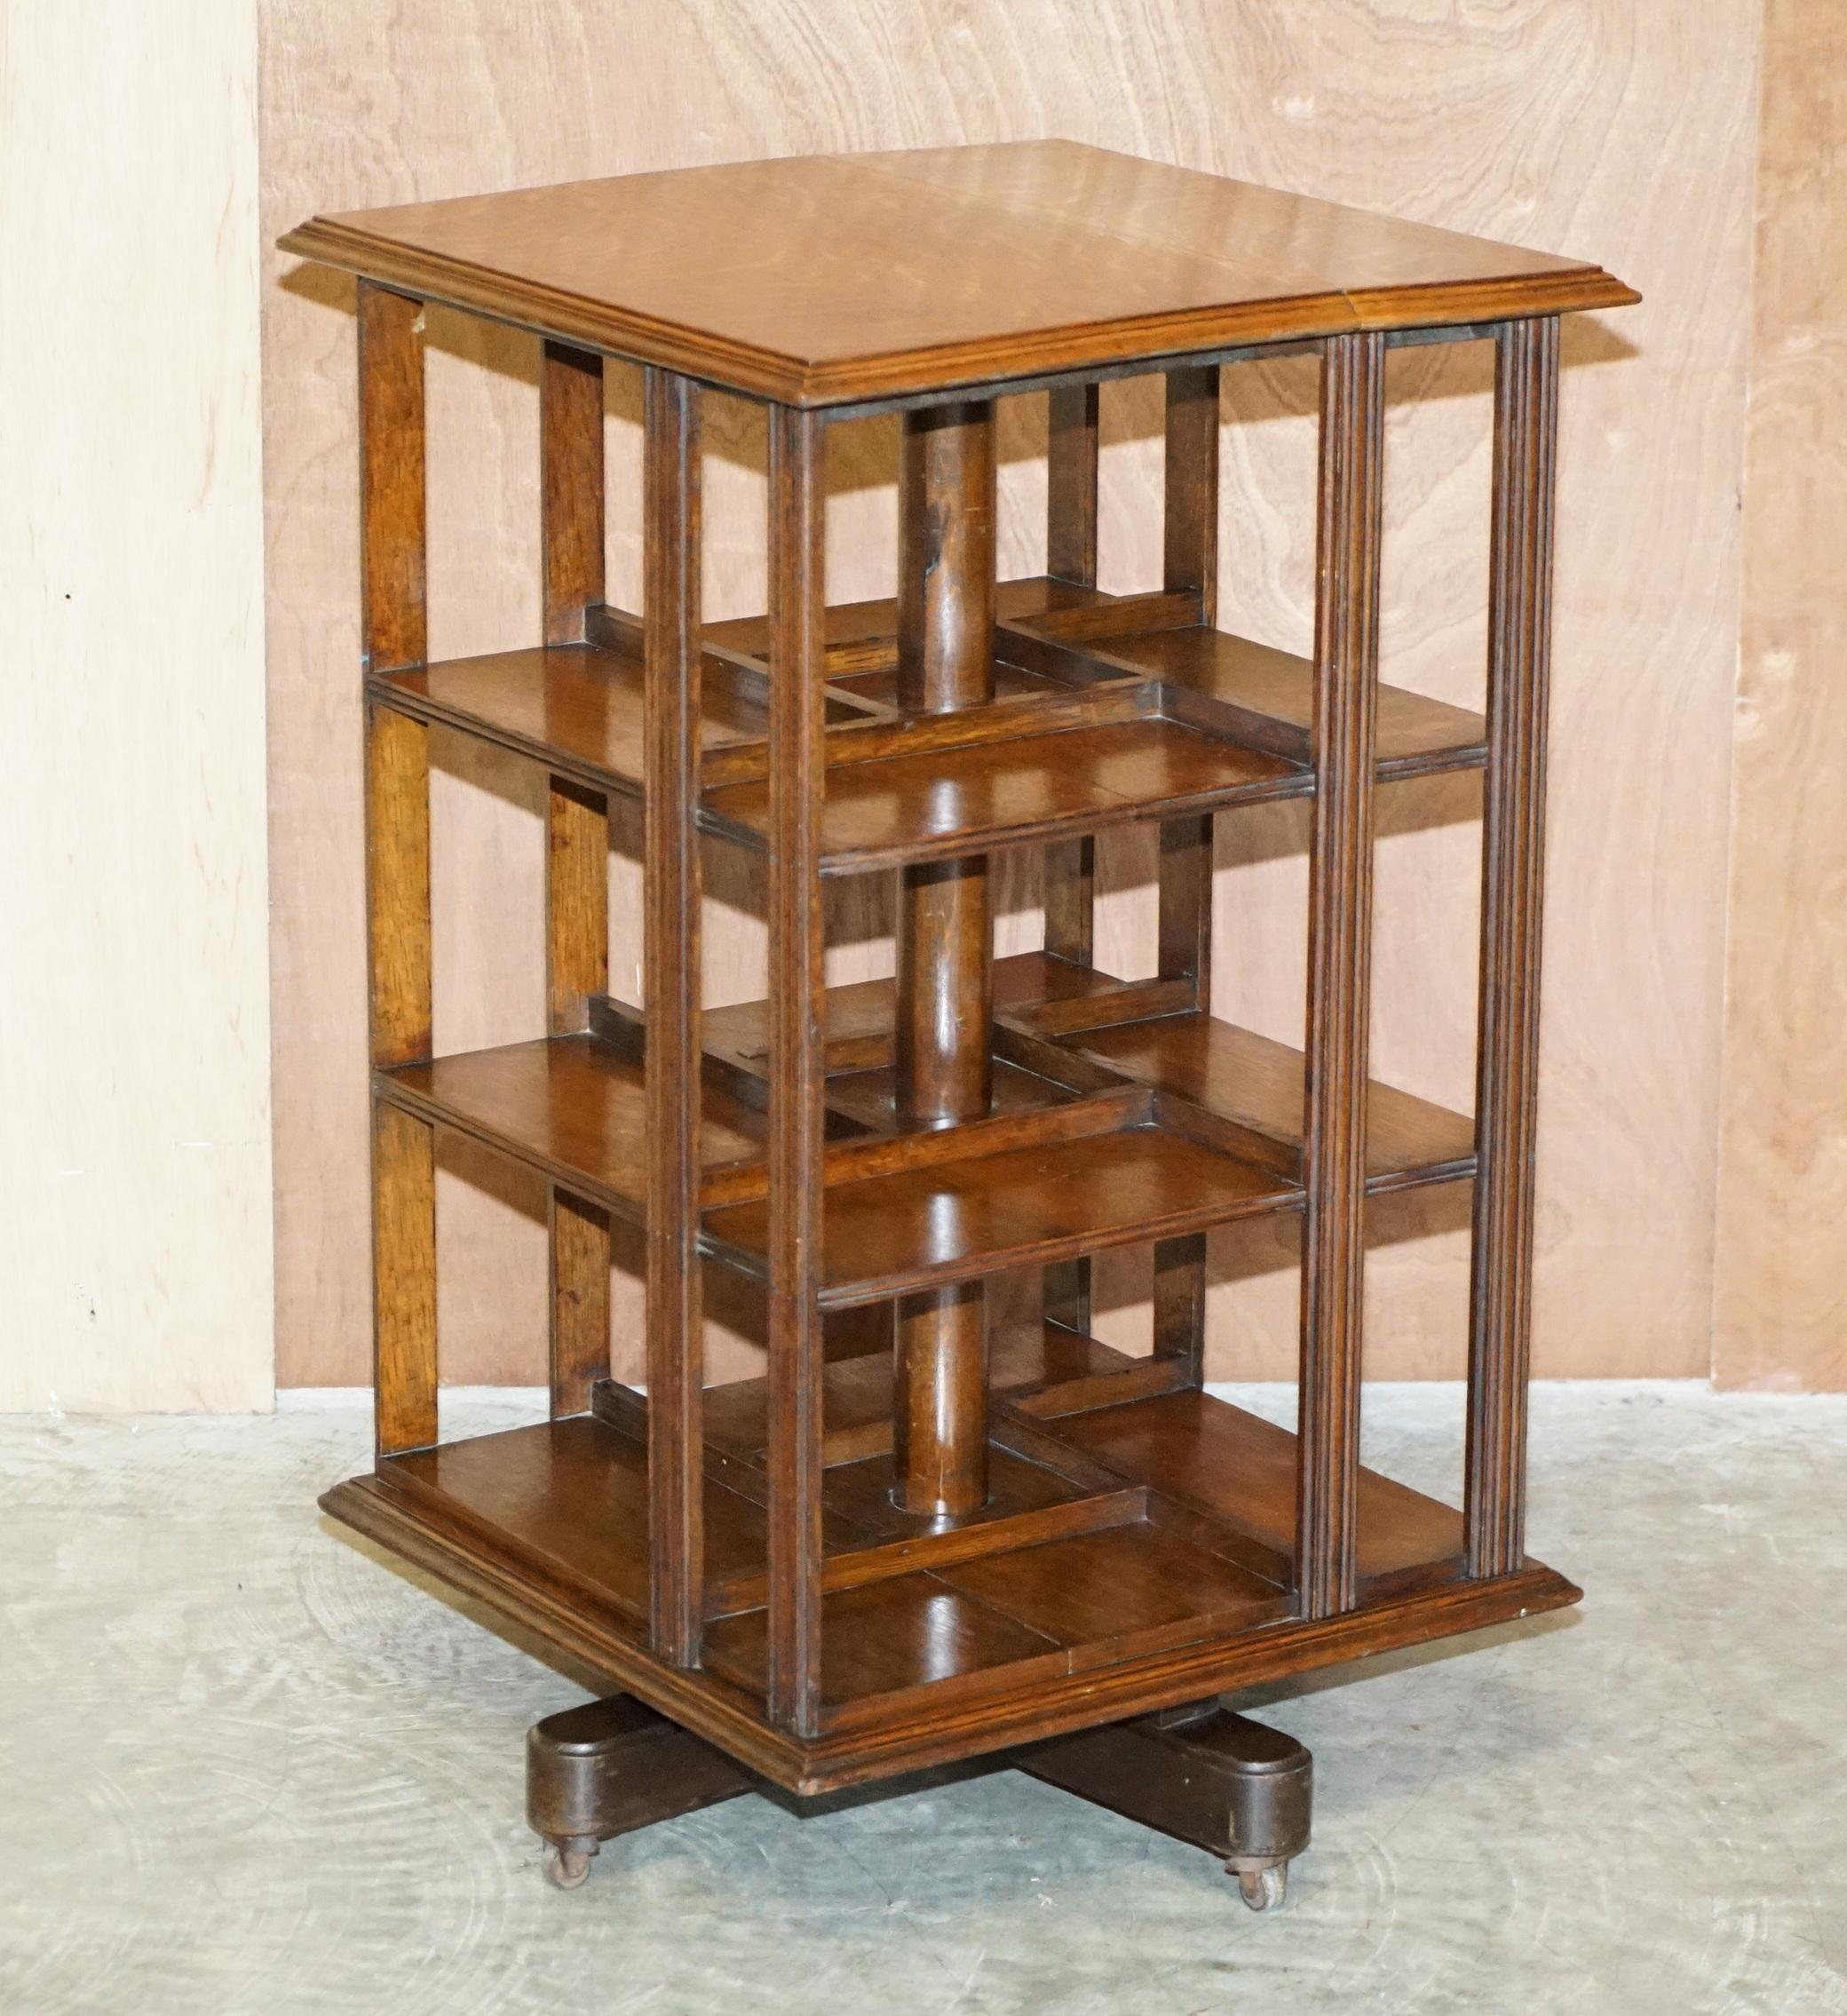 We are delighted to offer this very well made English oak circa 1880-1900 revolving bookcase table with newspaper shelf 

A good looking and well made piece, you can fit an entire at home personal library in this thing, it has a sorting table top